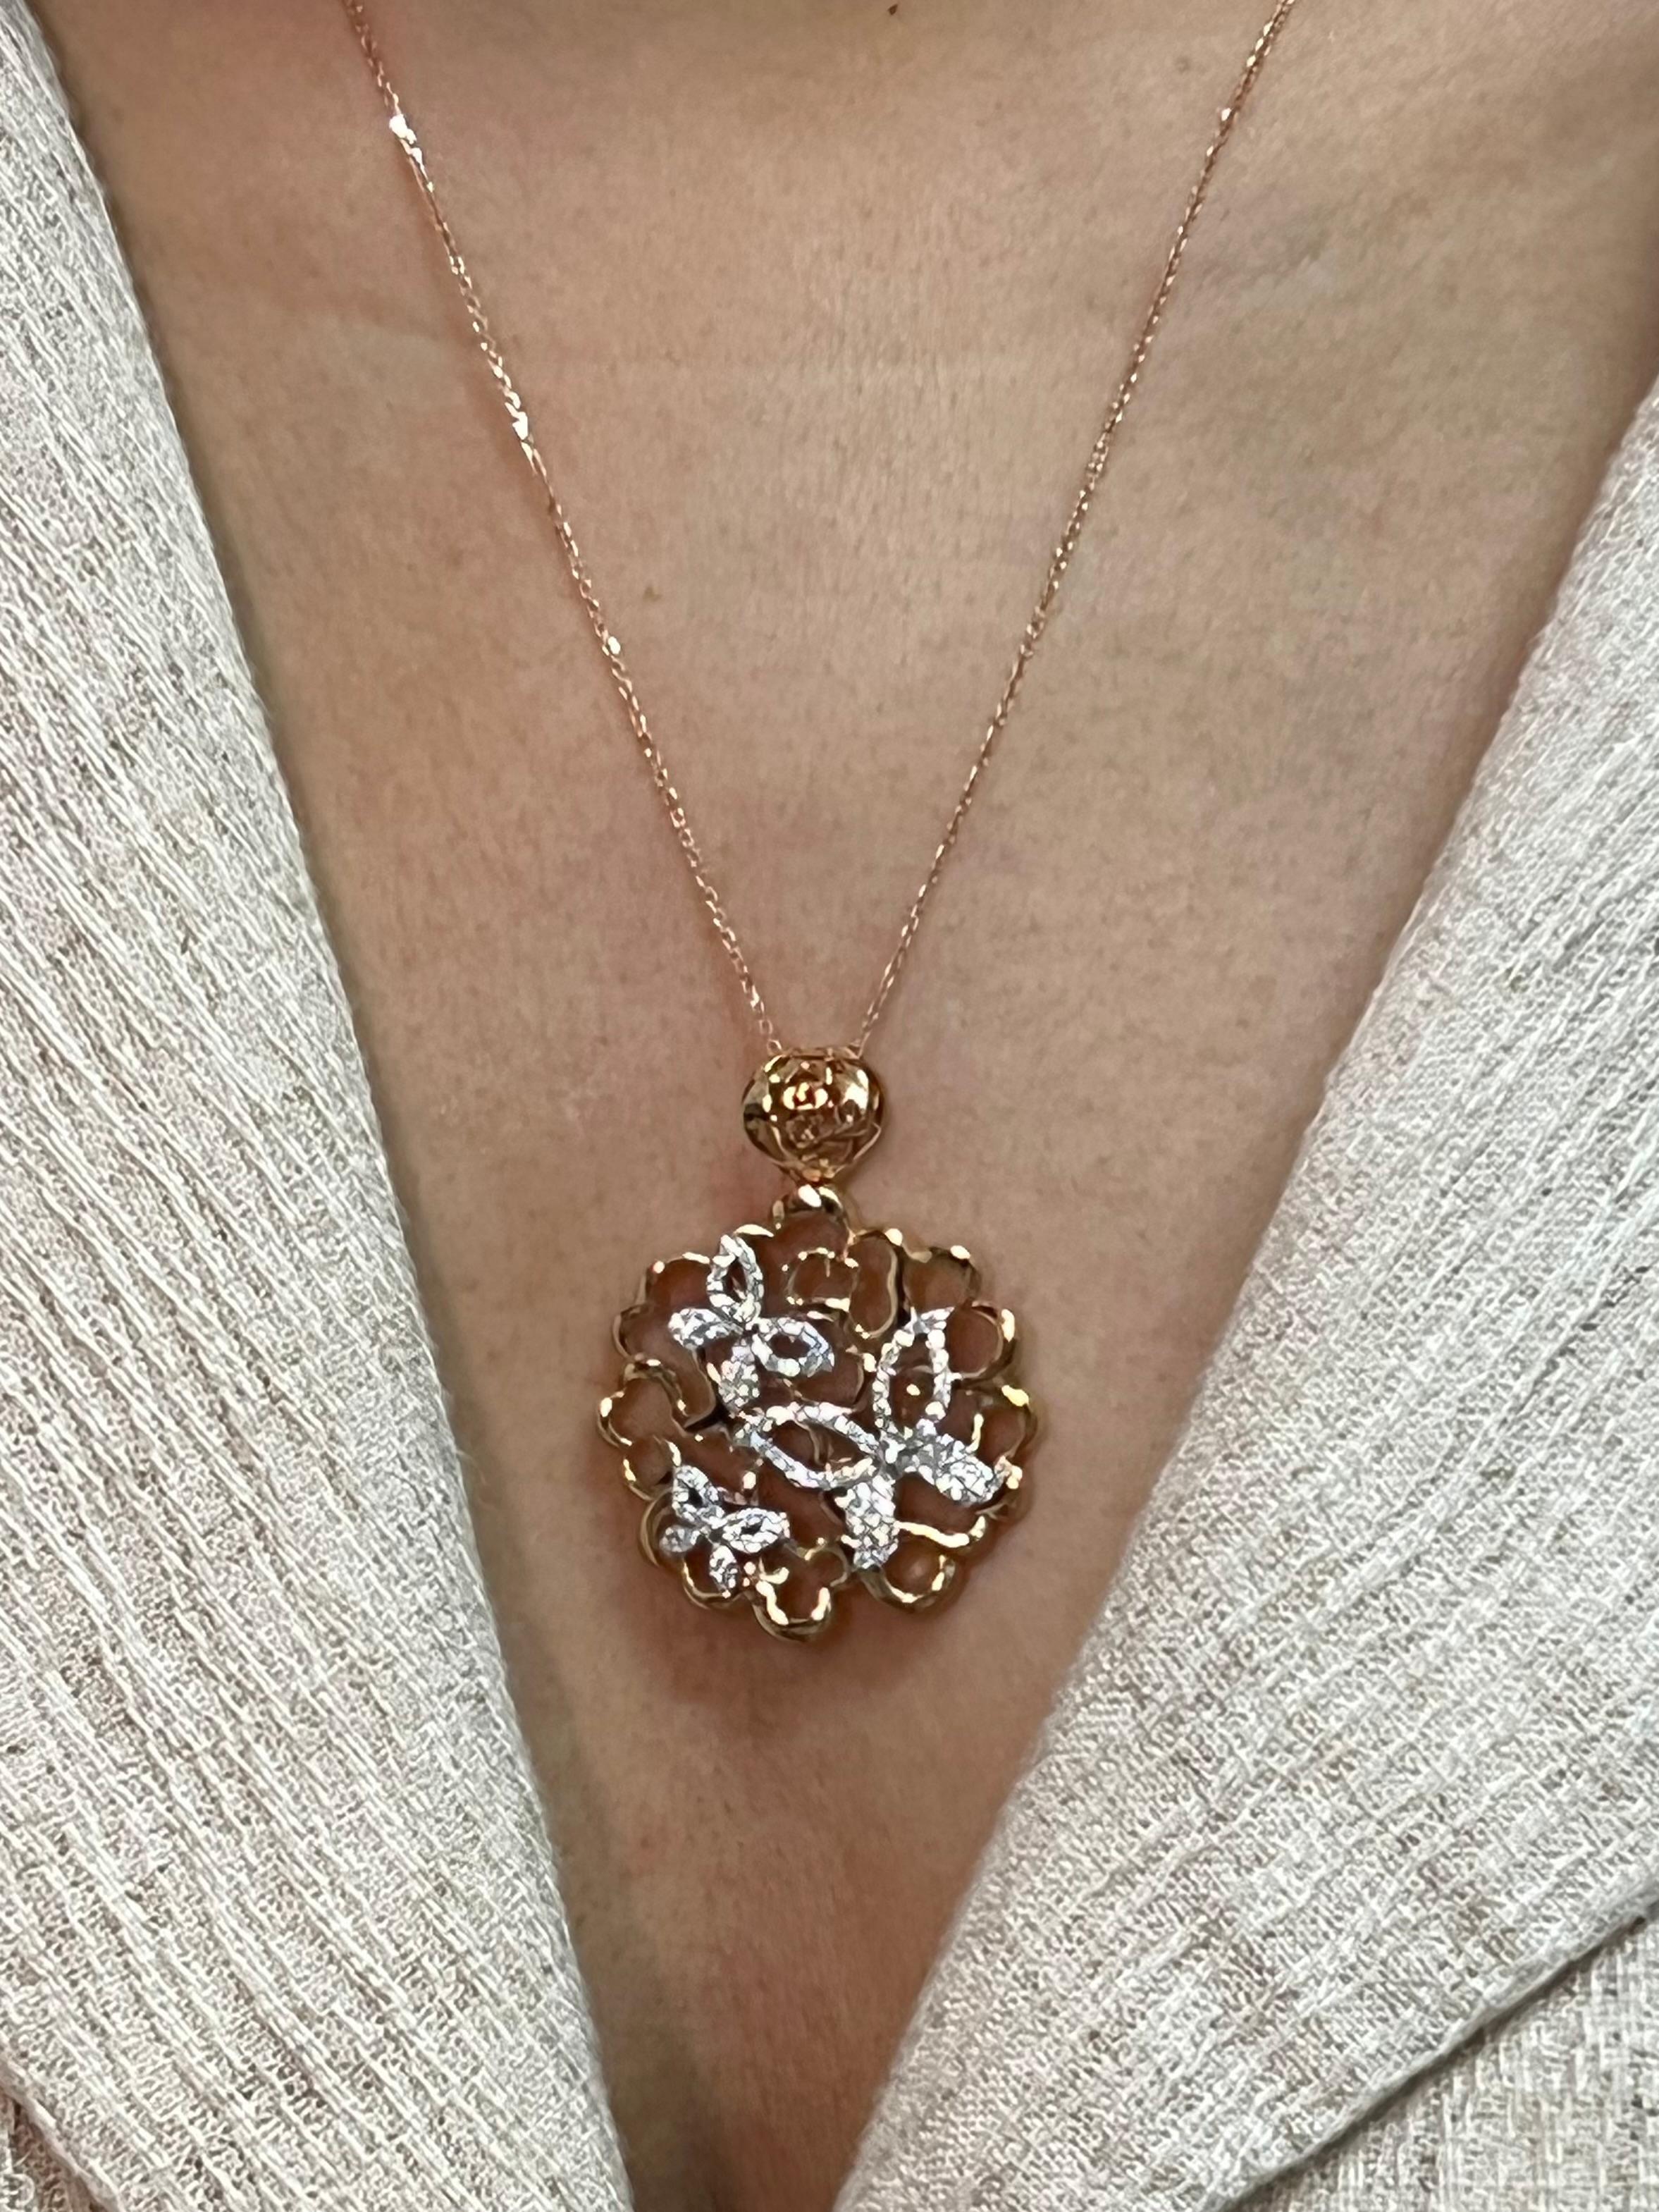 Please check out the HD video. This pendant has a 3D look with an excellent depth of field. It looks like 3 butterflies floating on clouds. There are 100 diamonds totaling 0.55cts used in this rose and white gold setting. An 18k rose gold chain will